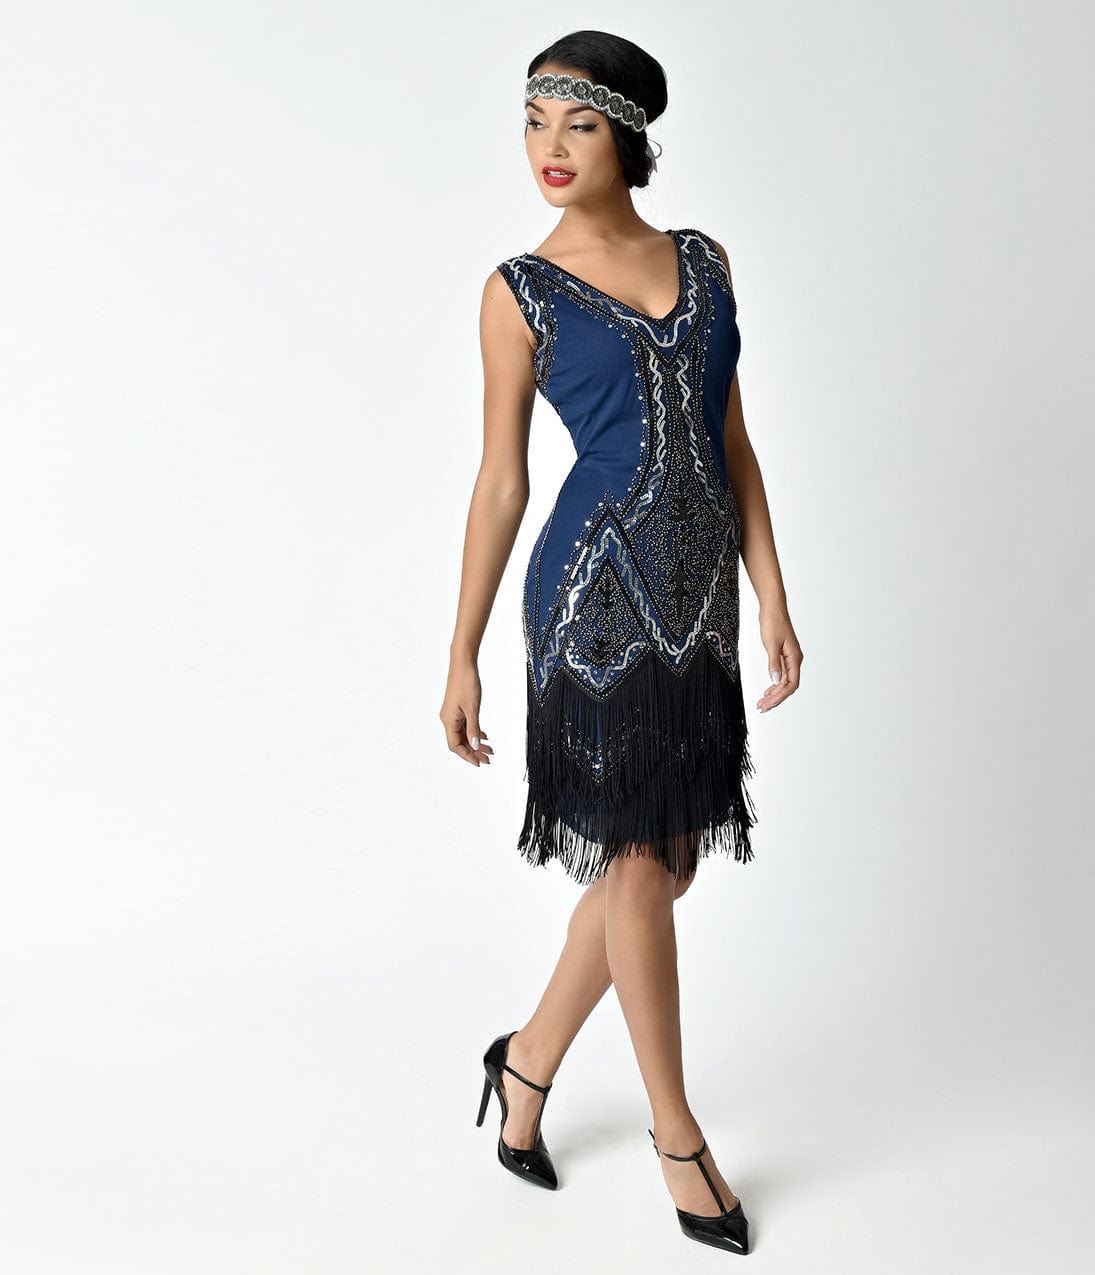 Where to Buy 1920s Dresses- Vintage, Repro, Inspired Styles Online